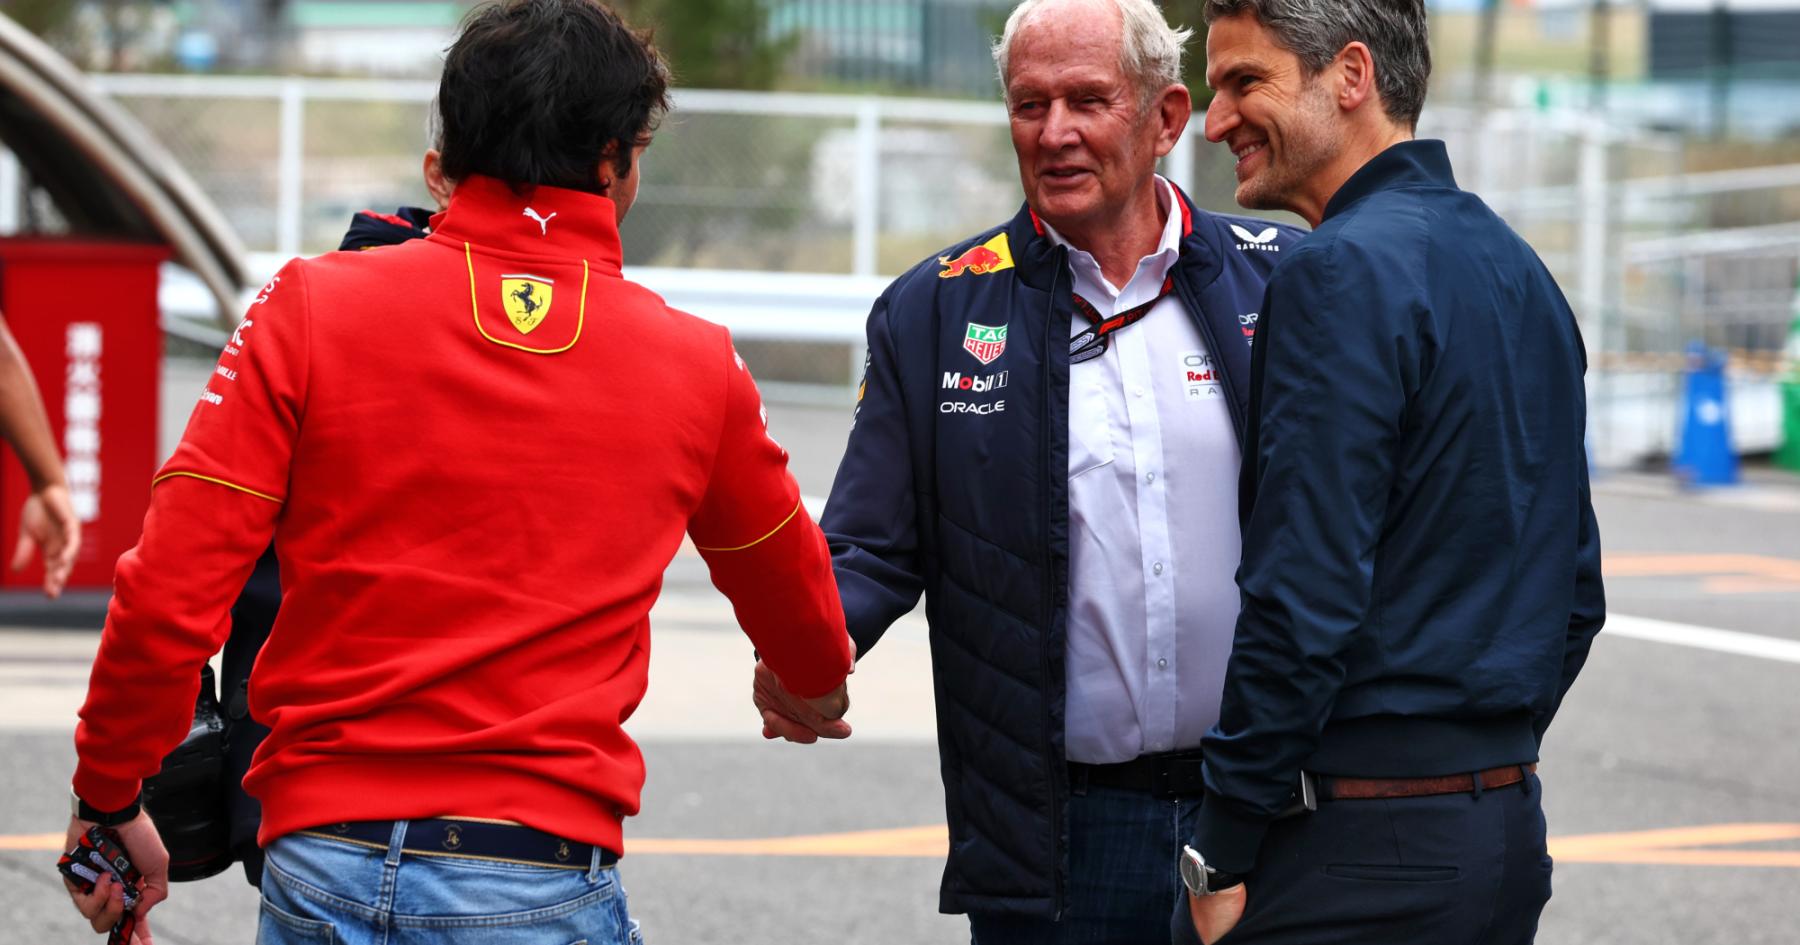 Breaking News: Marko Teases Sainz Move in Impending Decision